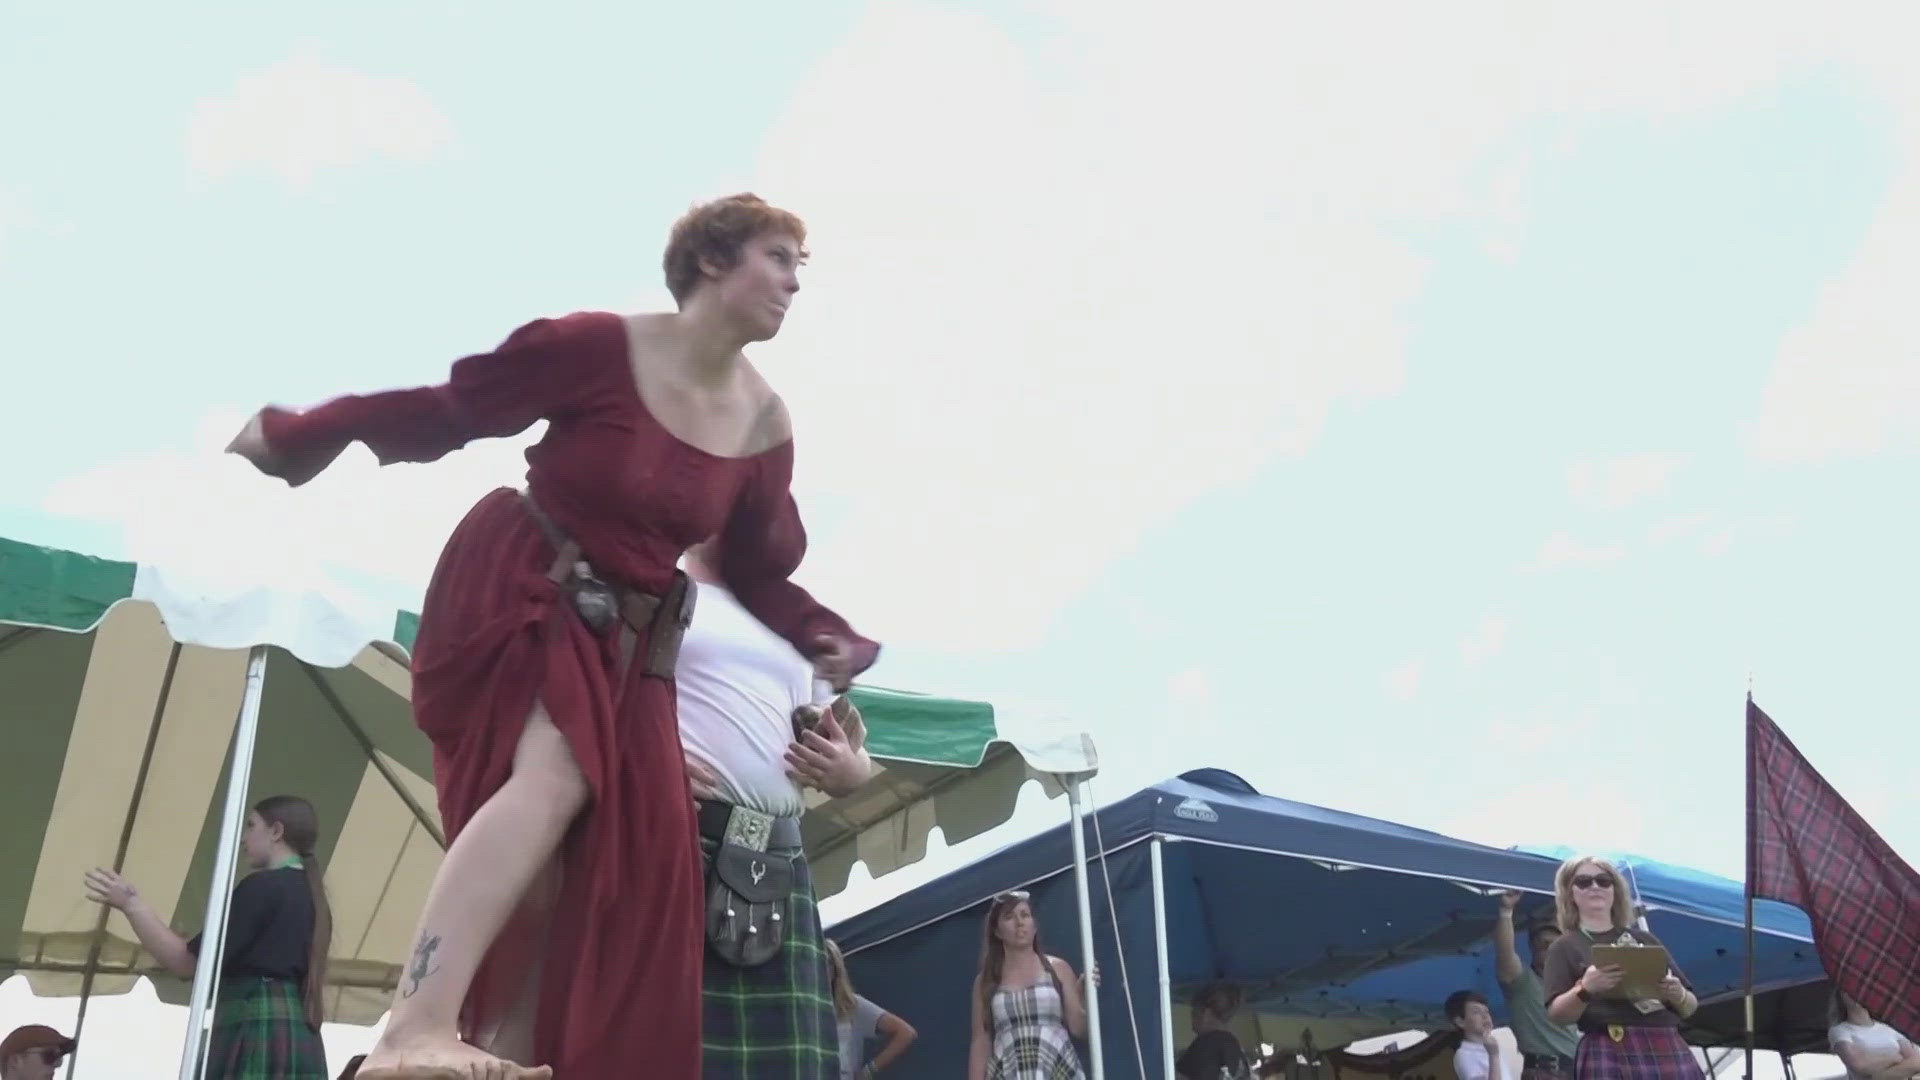 People came from all over East Tennessee to celebrate and learn about Scottish history and culture.